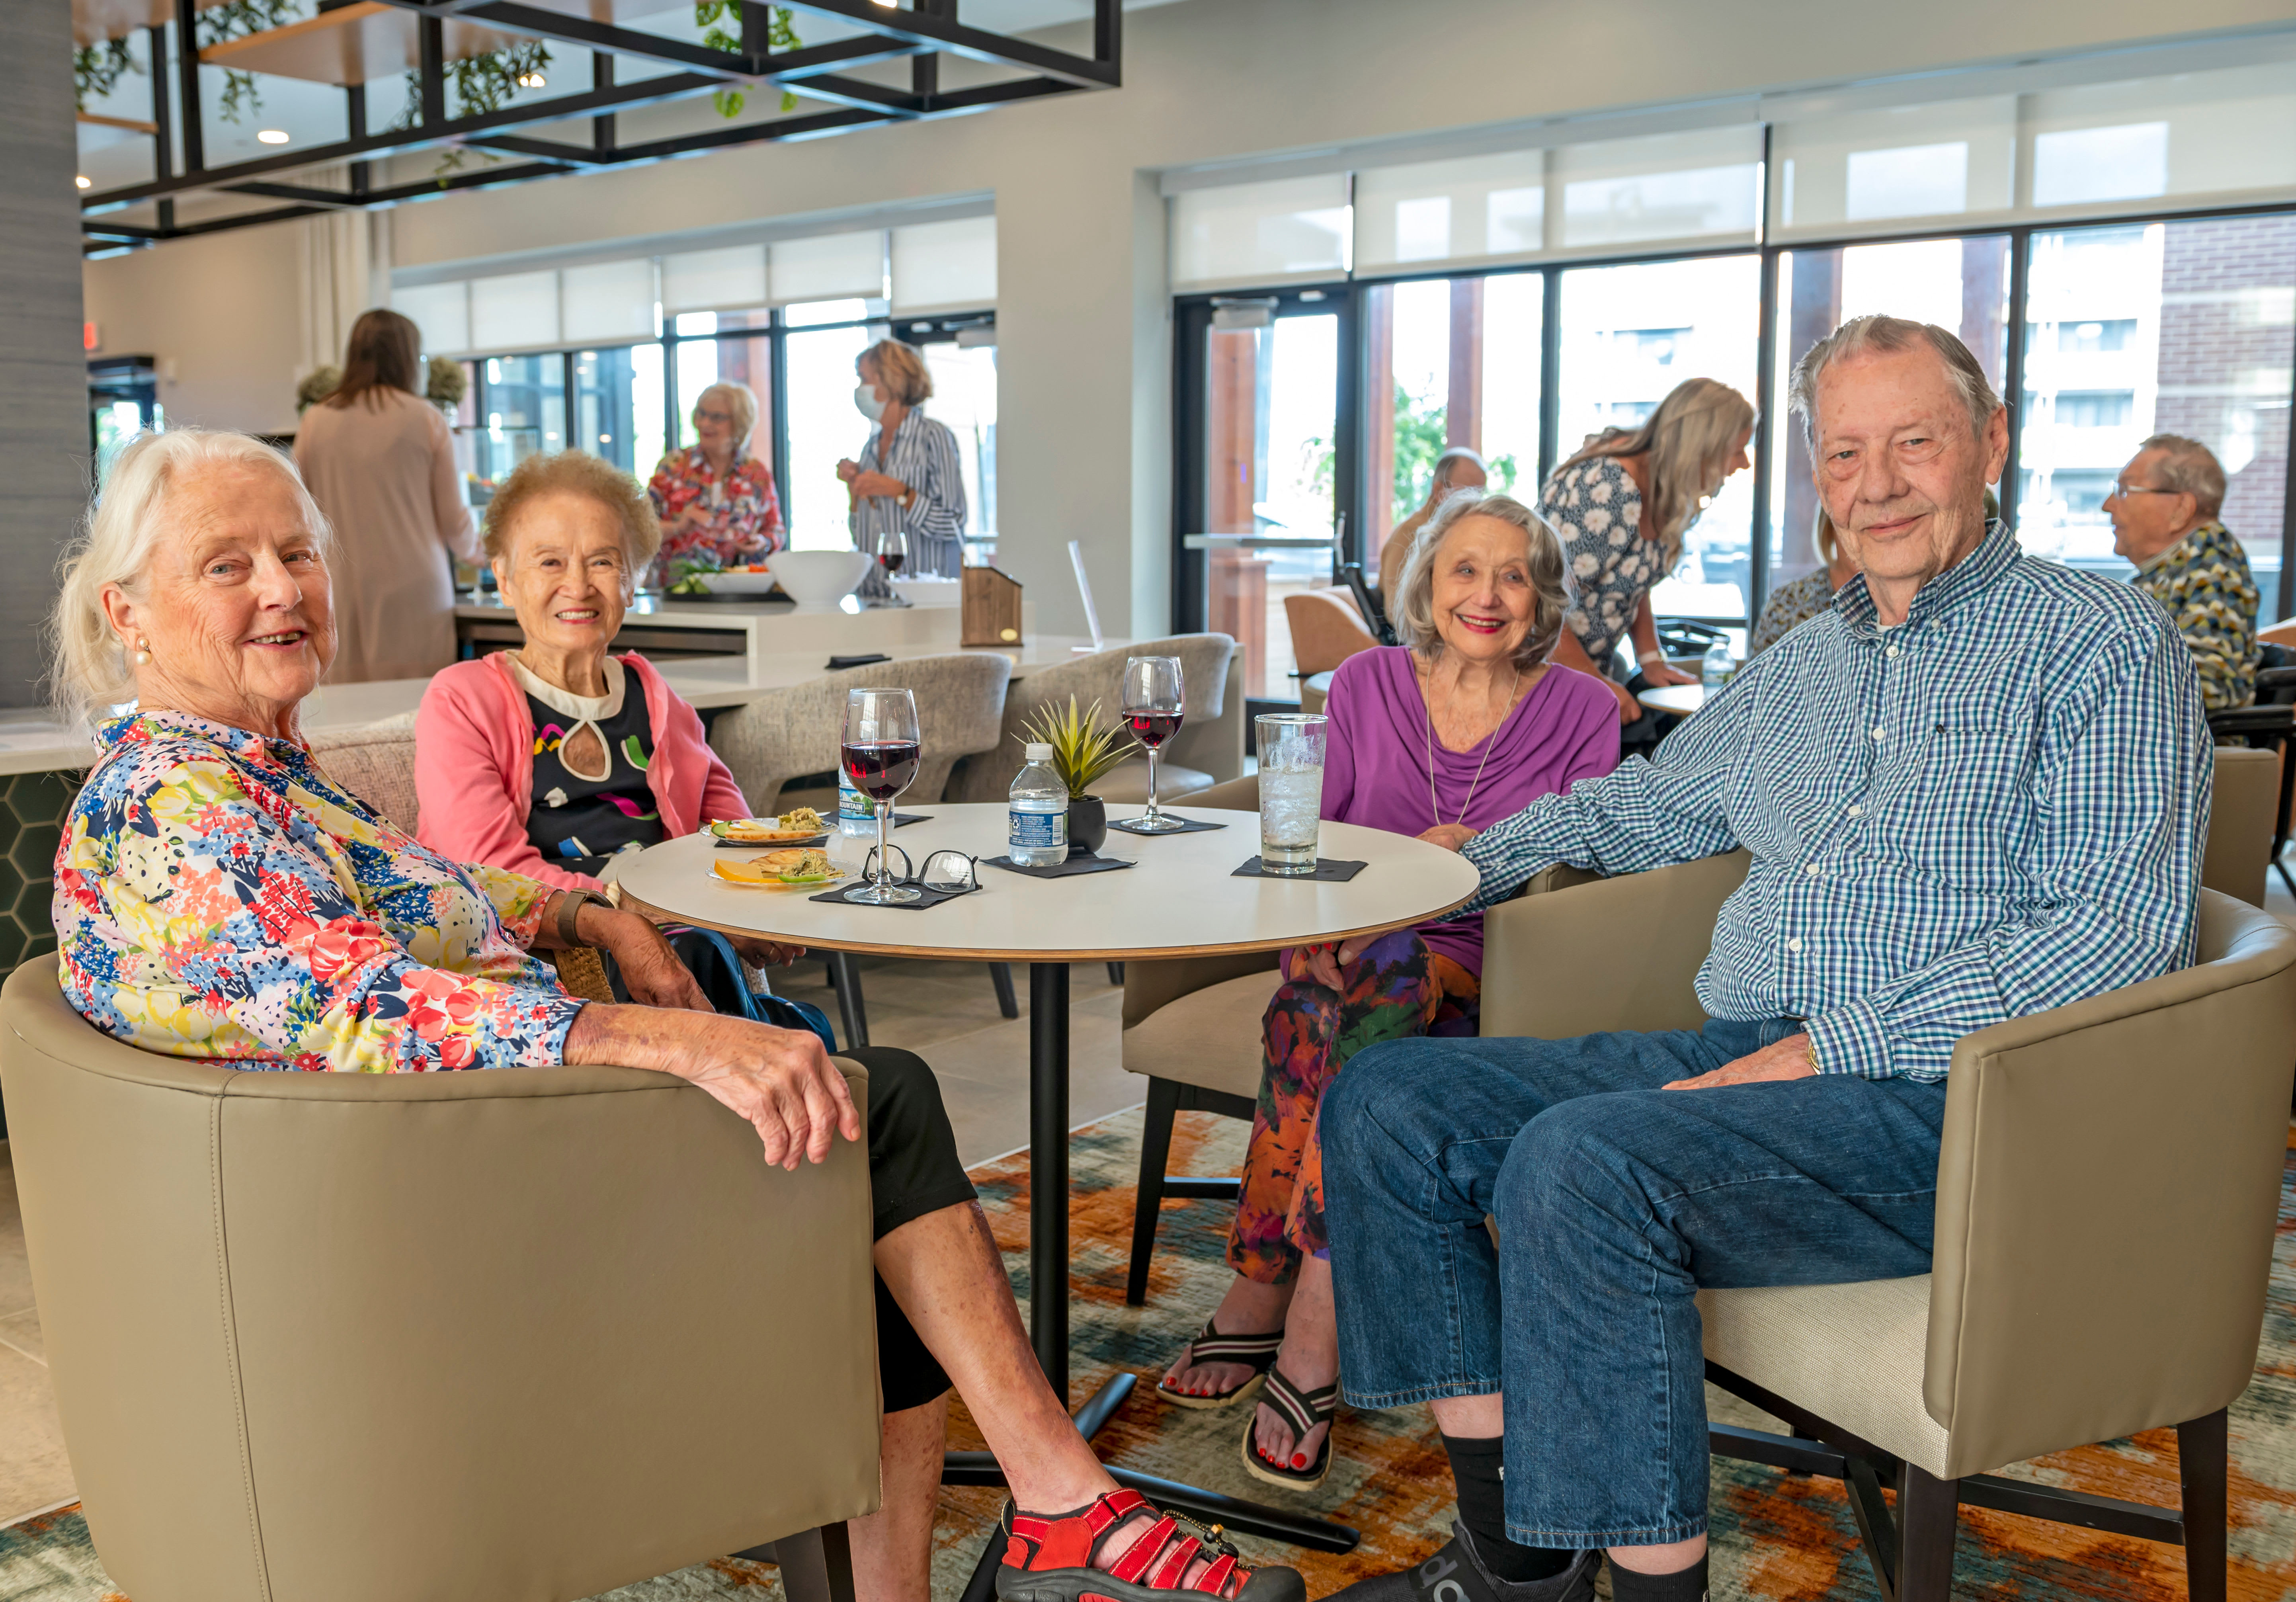 Residents laughing together during breakfast at Anthology of Charlottesville in Charlottesville, Virginia